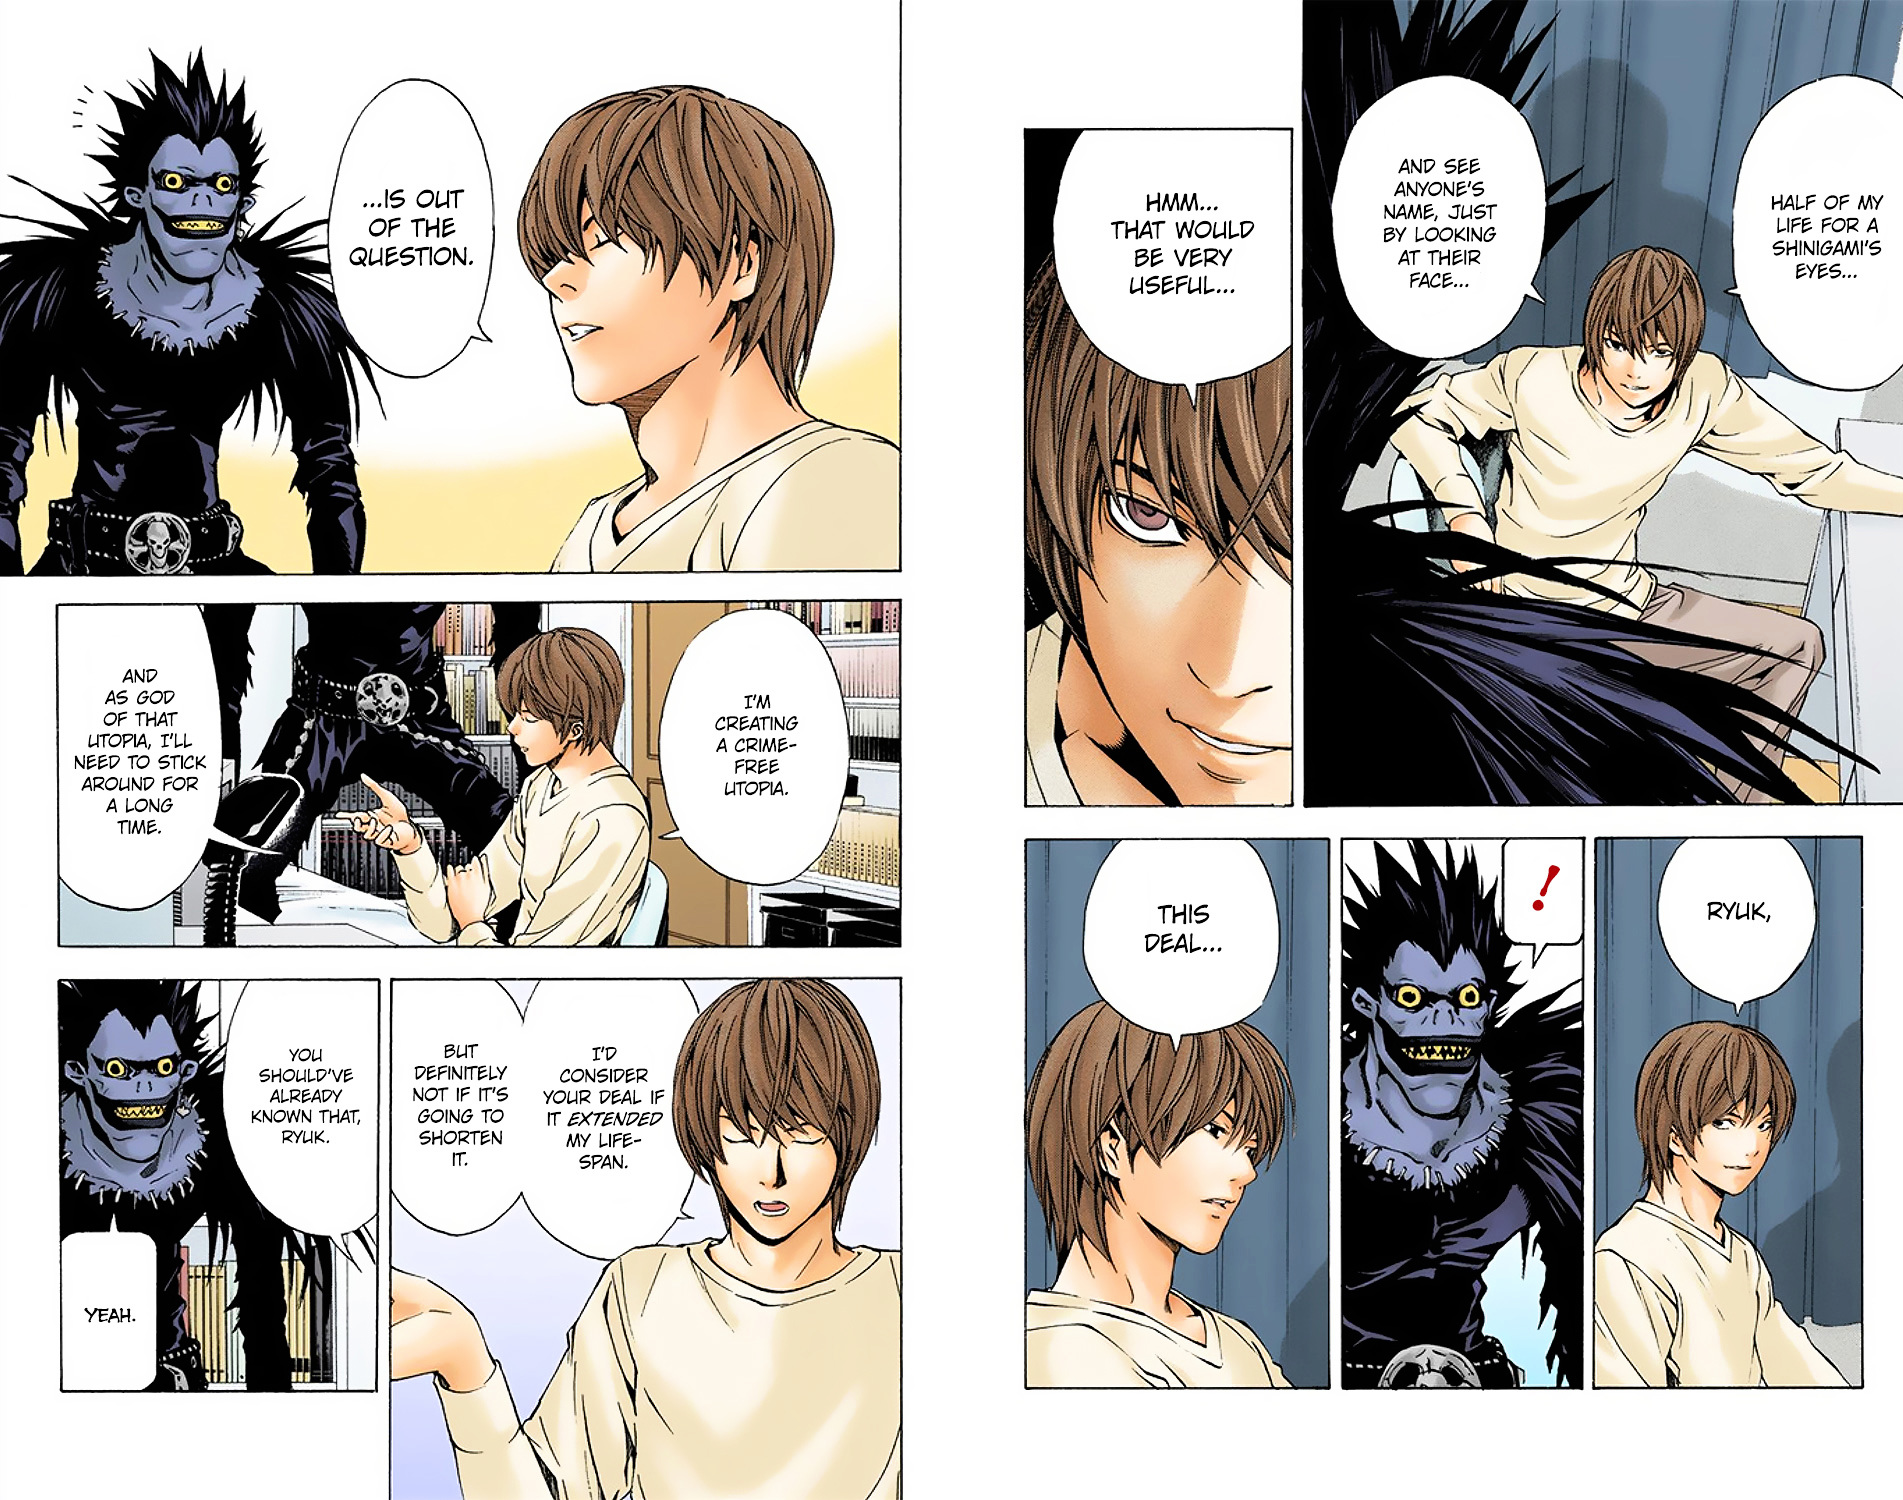 Death Note [Colored Edition] - Page 2